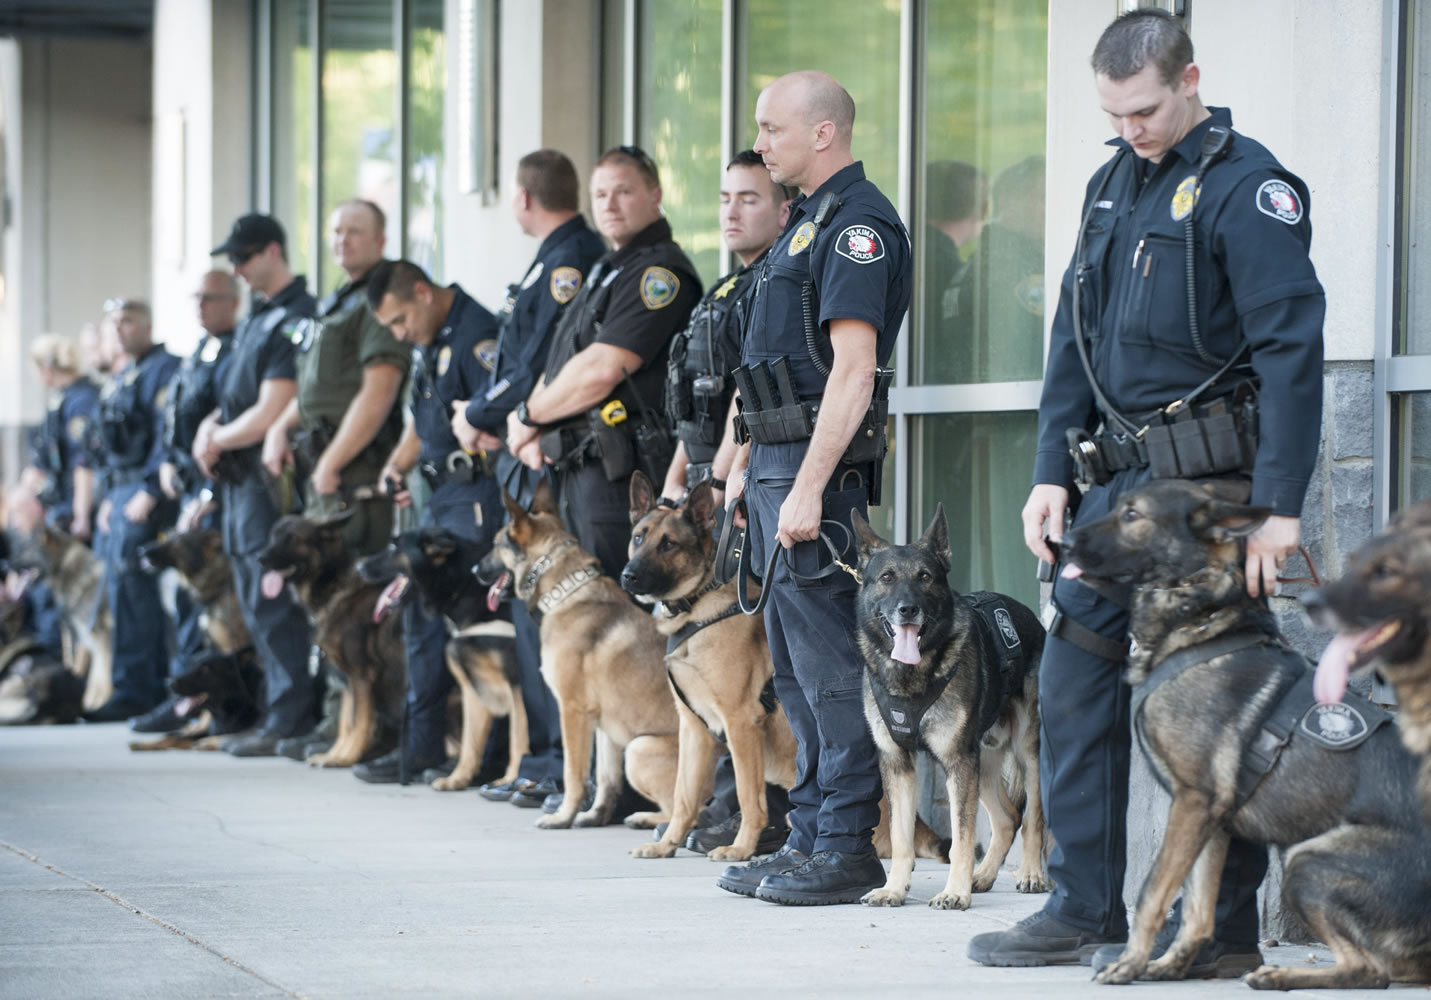 Police dogs from all over the Northwest made a pilgrimage Tuesday to the Hilton Vancouver Washington to pay their respects to Ike, a Vancouver Police Department dog, at a public memorial service Tuesday. Ike was killed in the line of duty earlier this month.